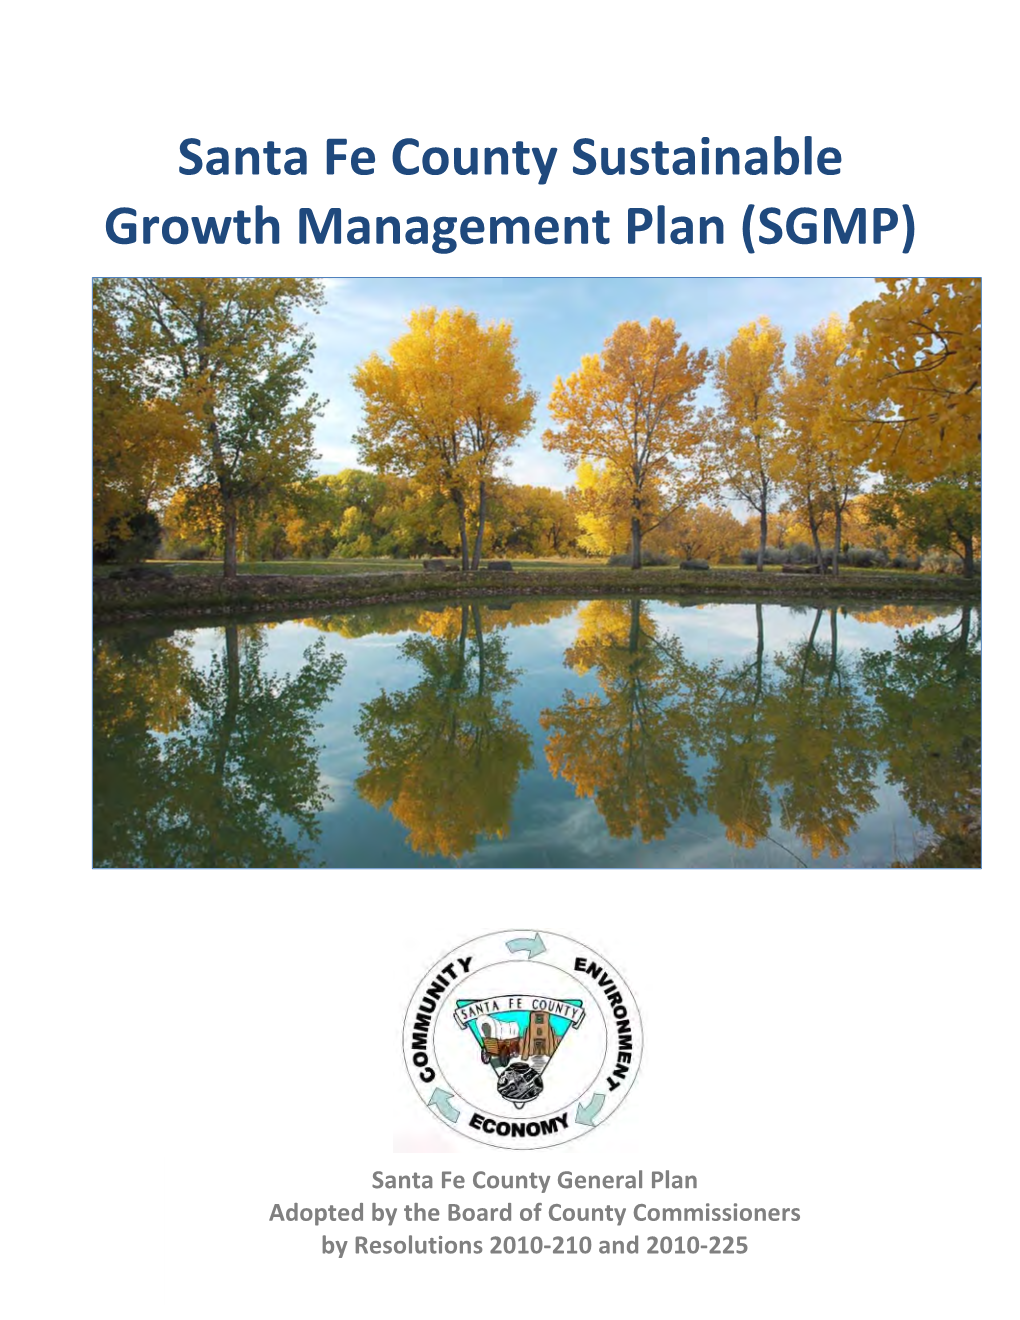 Santa Fe County Sustainable Growth Management Plan (SGMP)